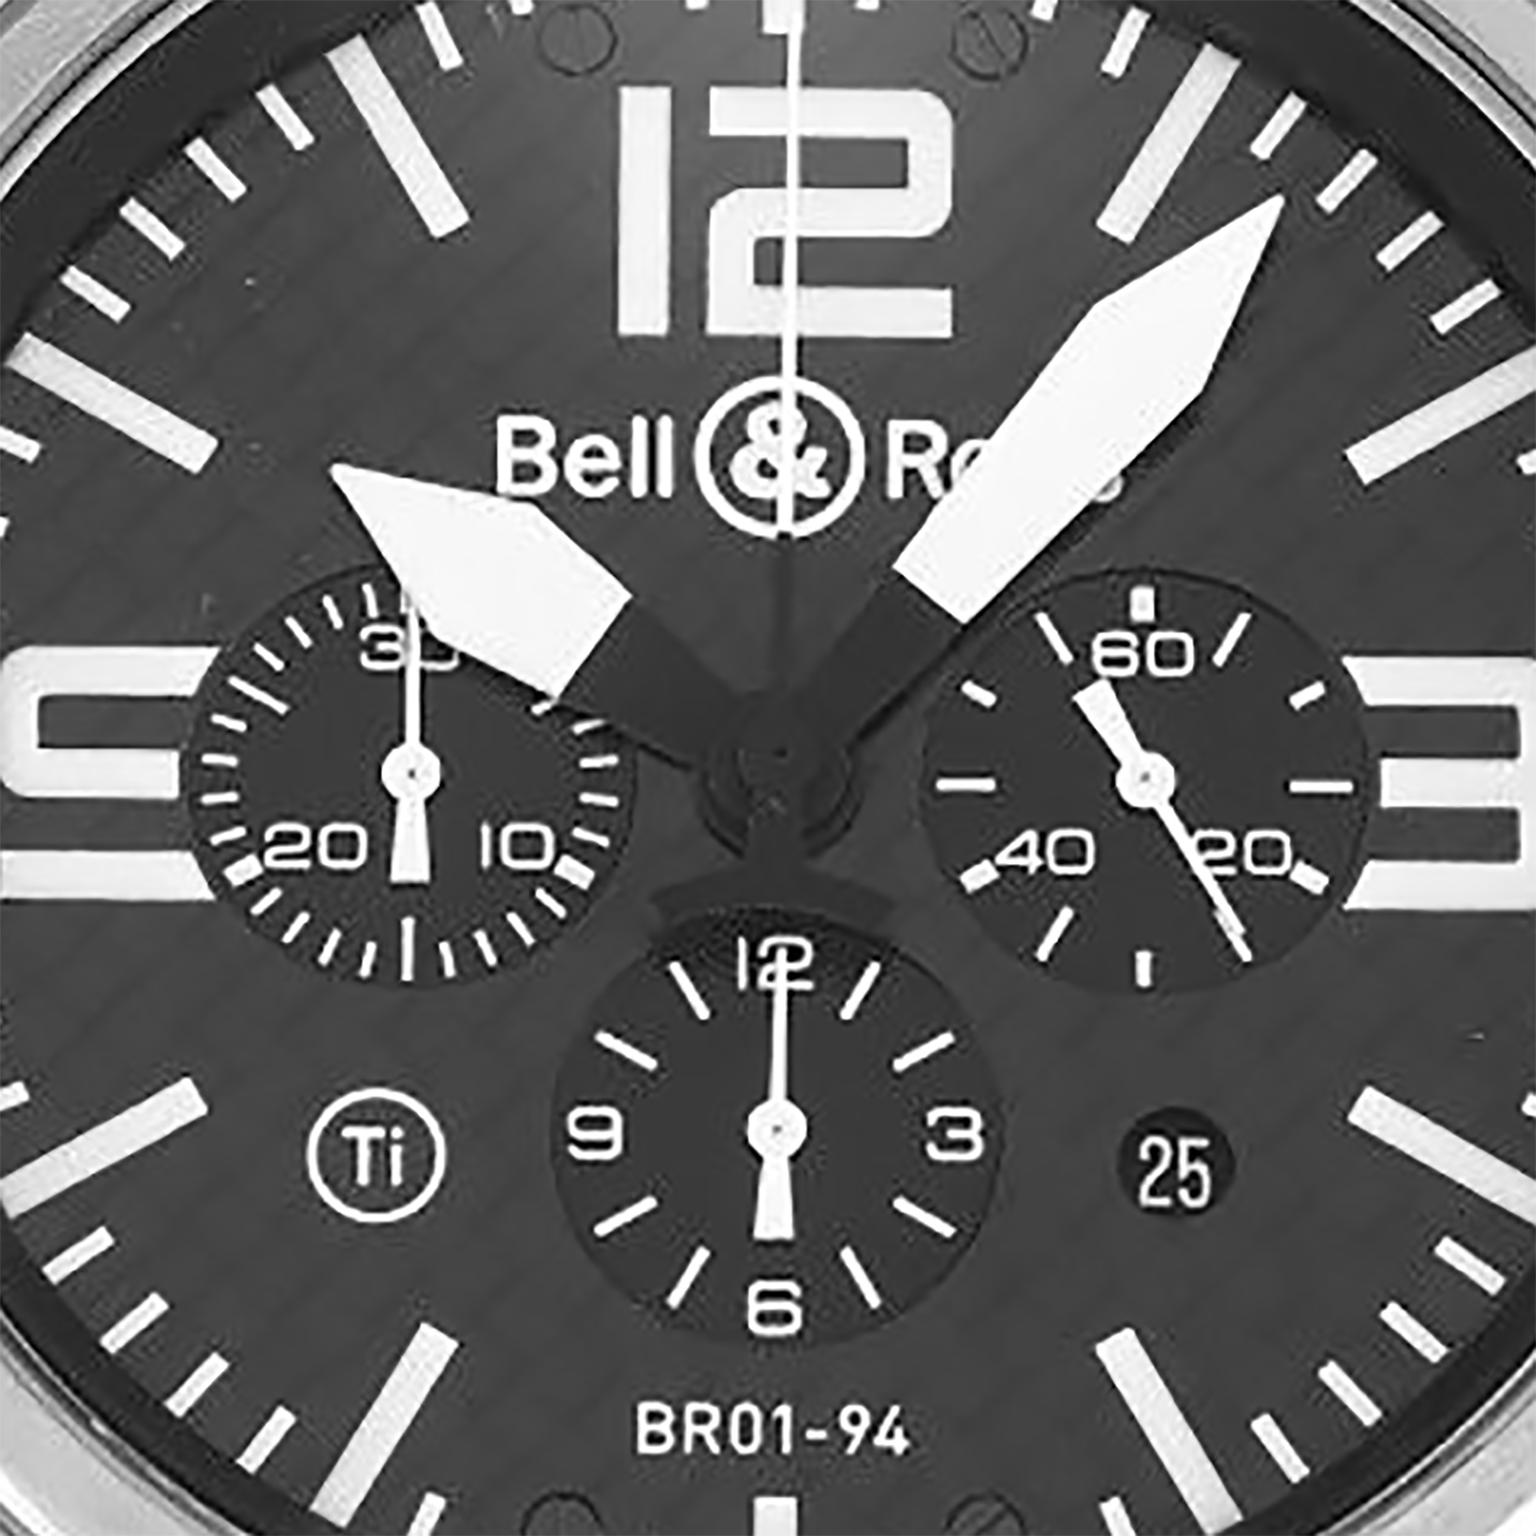 Bell & Ross BR01-94 Titanium and Stainless Steel Watch

Bell & Ross BR01-94 titanium & stainless steel case with a black rubber strap and stainless steel buckle. Black dial with white hands and white index -  Arabic numerals hour markers. Movement: